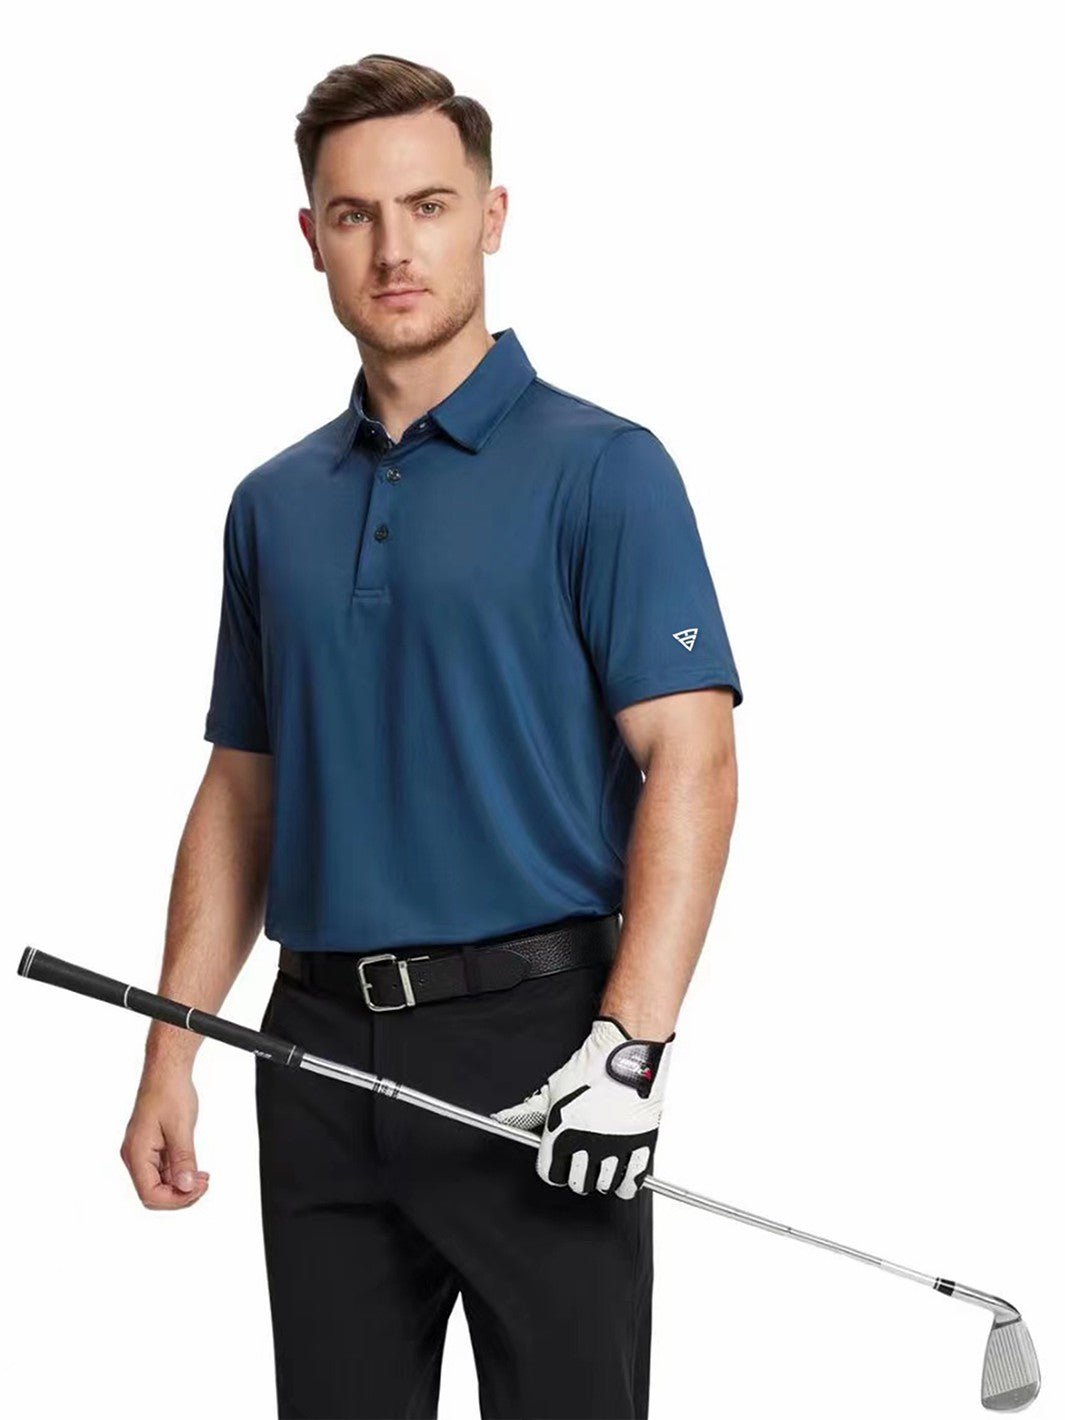 Solid Color Golf Shirts for Men Casual Dry Fit Golf Polo Shirts For Men